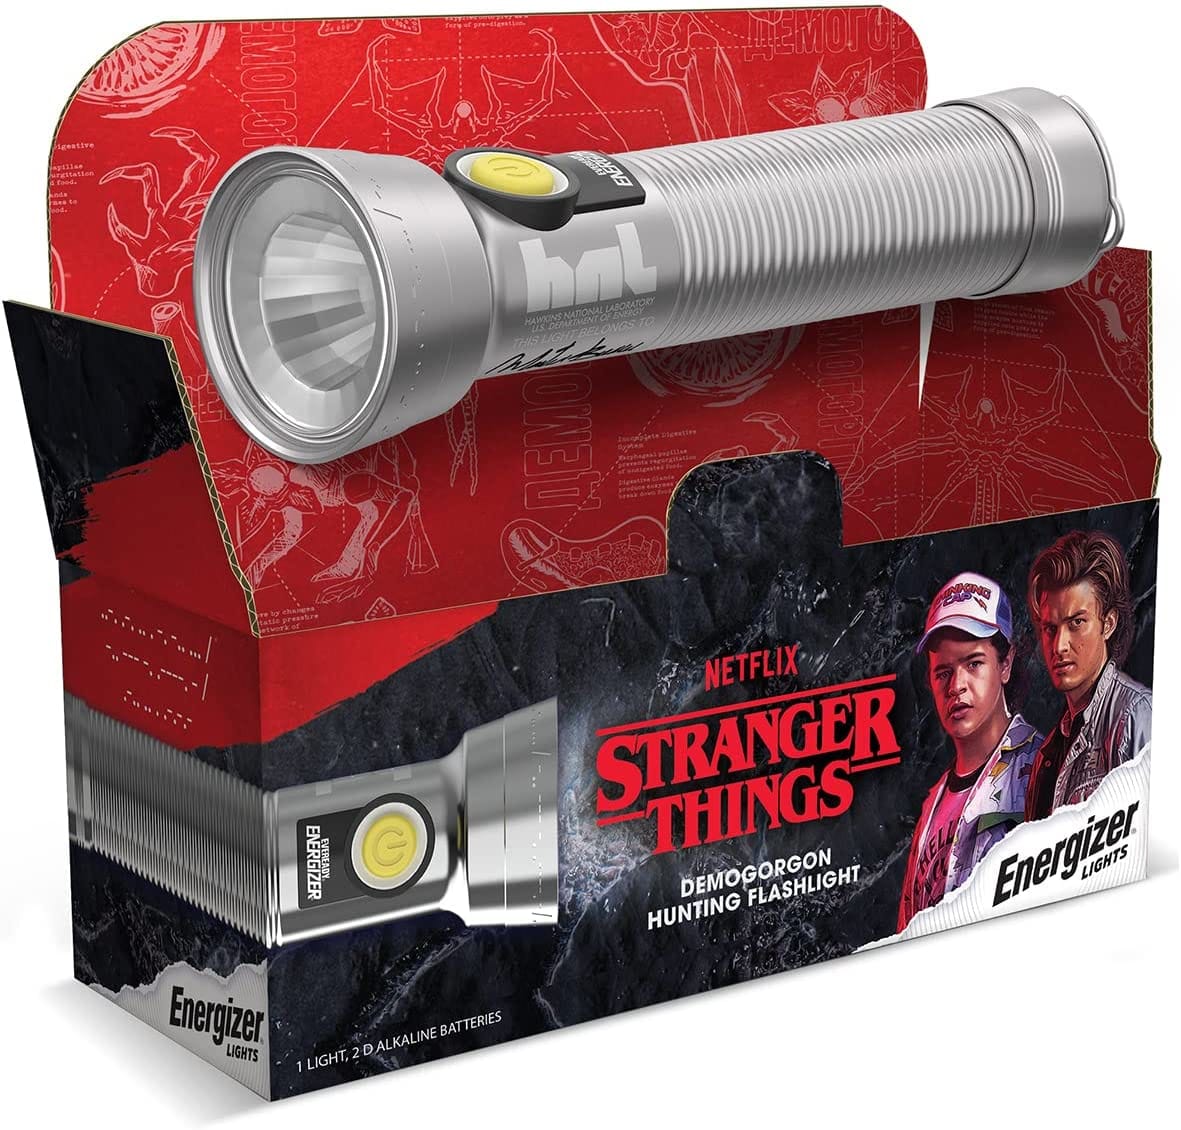 Check out Energizer's Stranger Things collector's edition Demogorgon Hunting Flashlight from Amazon.